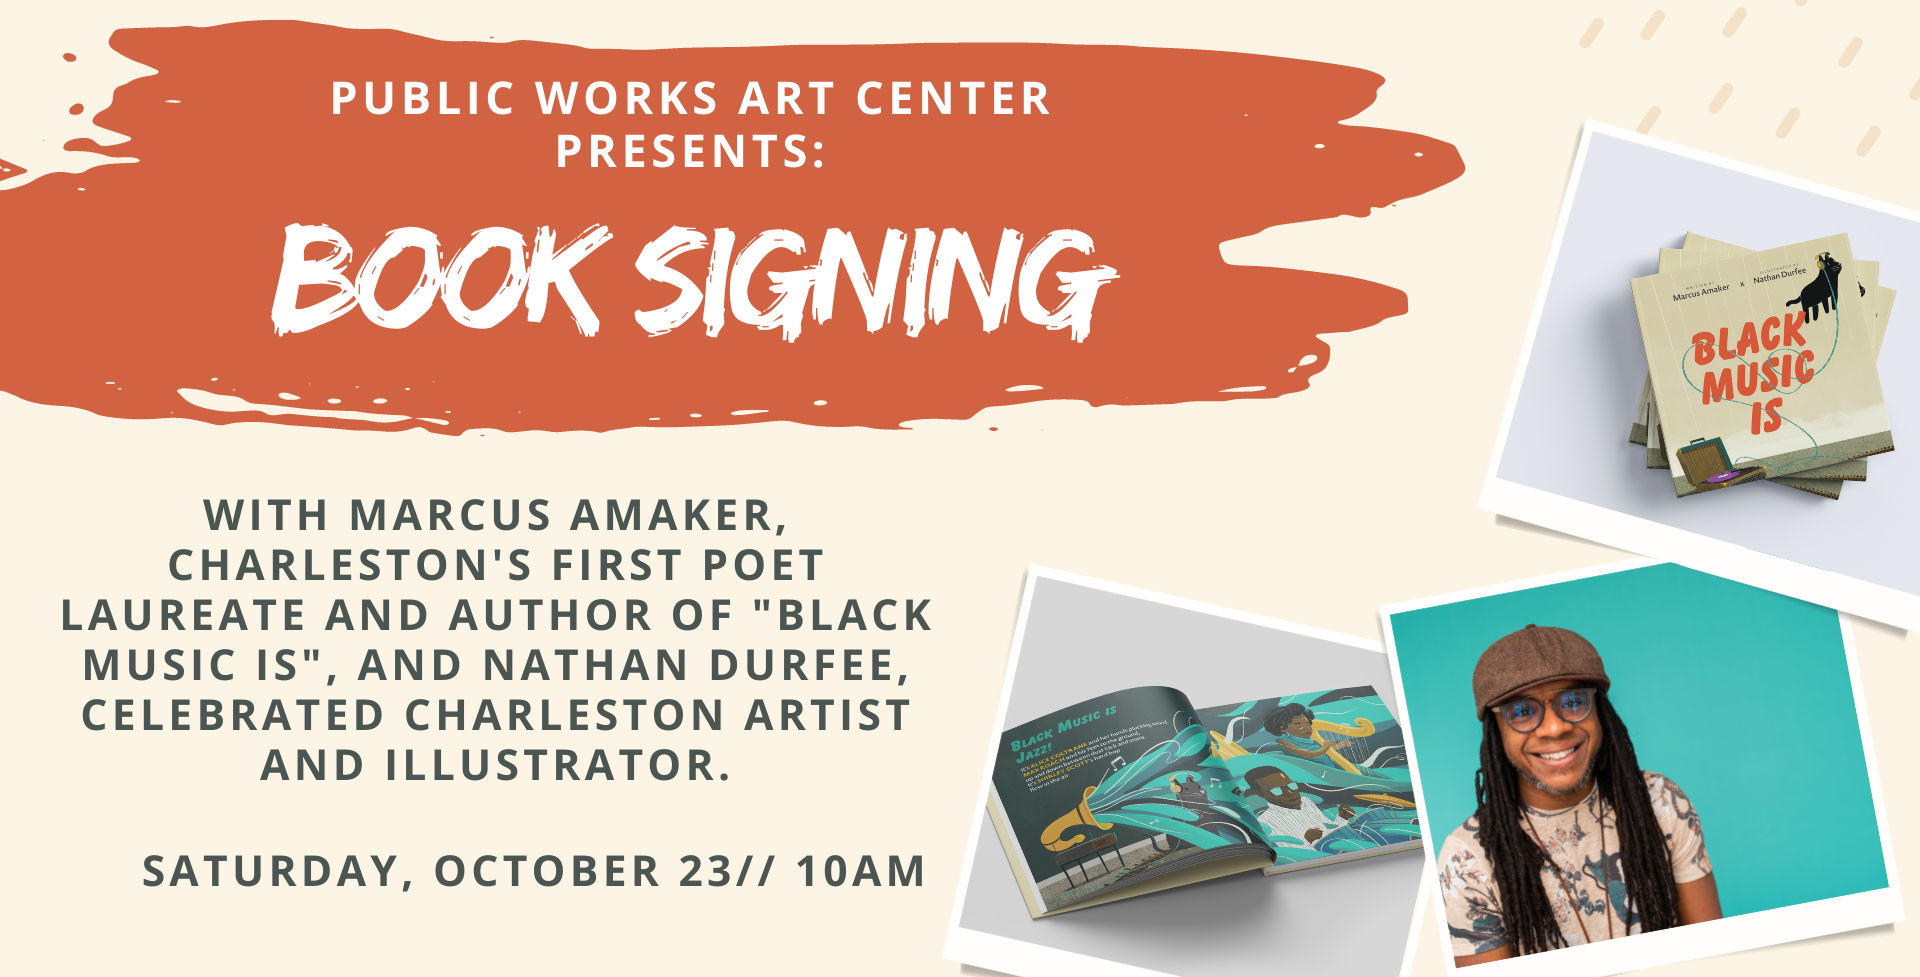 Book Signing of "Black Music Is" with Marcus Amaker and Nathan Durfee promotional image